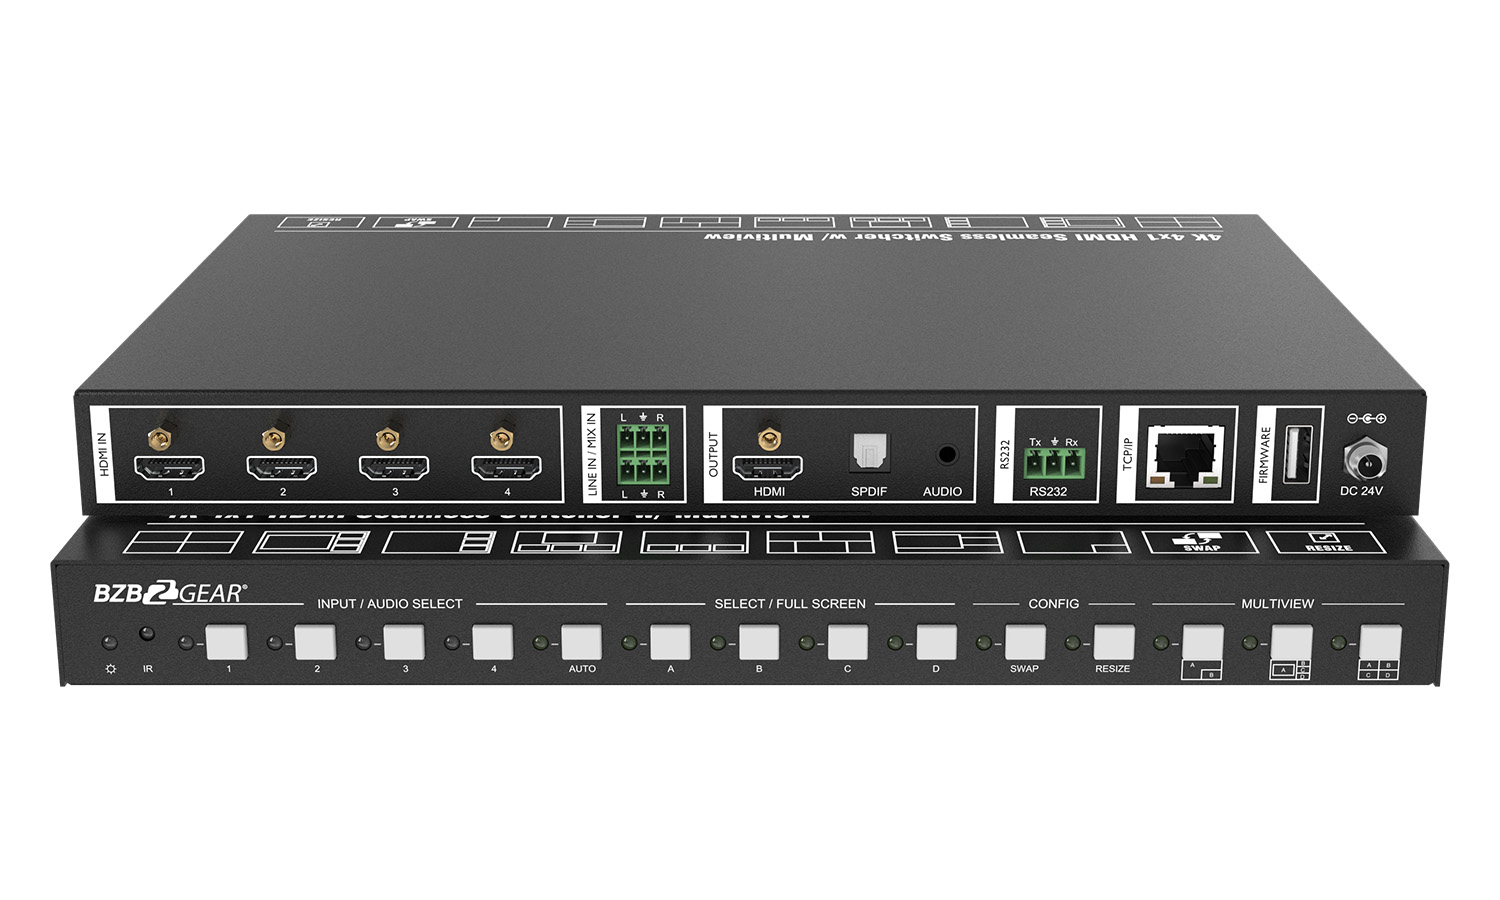 BG-UMV-HA41 4X1 4K UHD HDMI Seamless Multiviewer/Switcher/Scaler with Audio and RS-232 Support by BZBGEAR